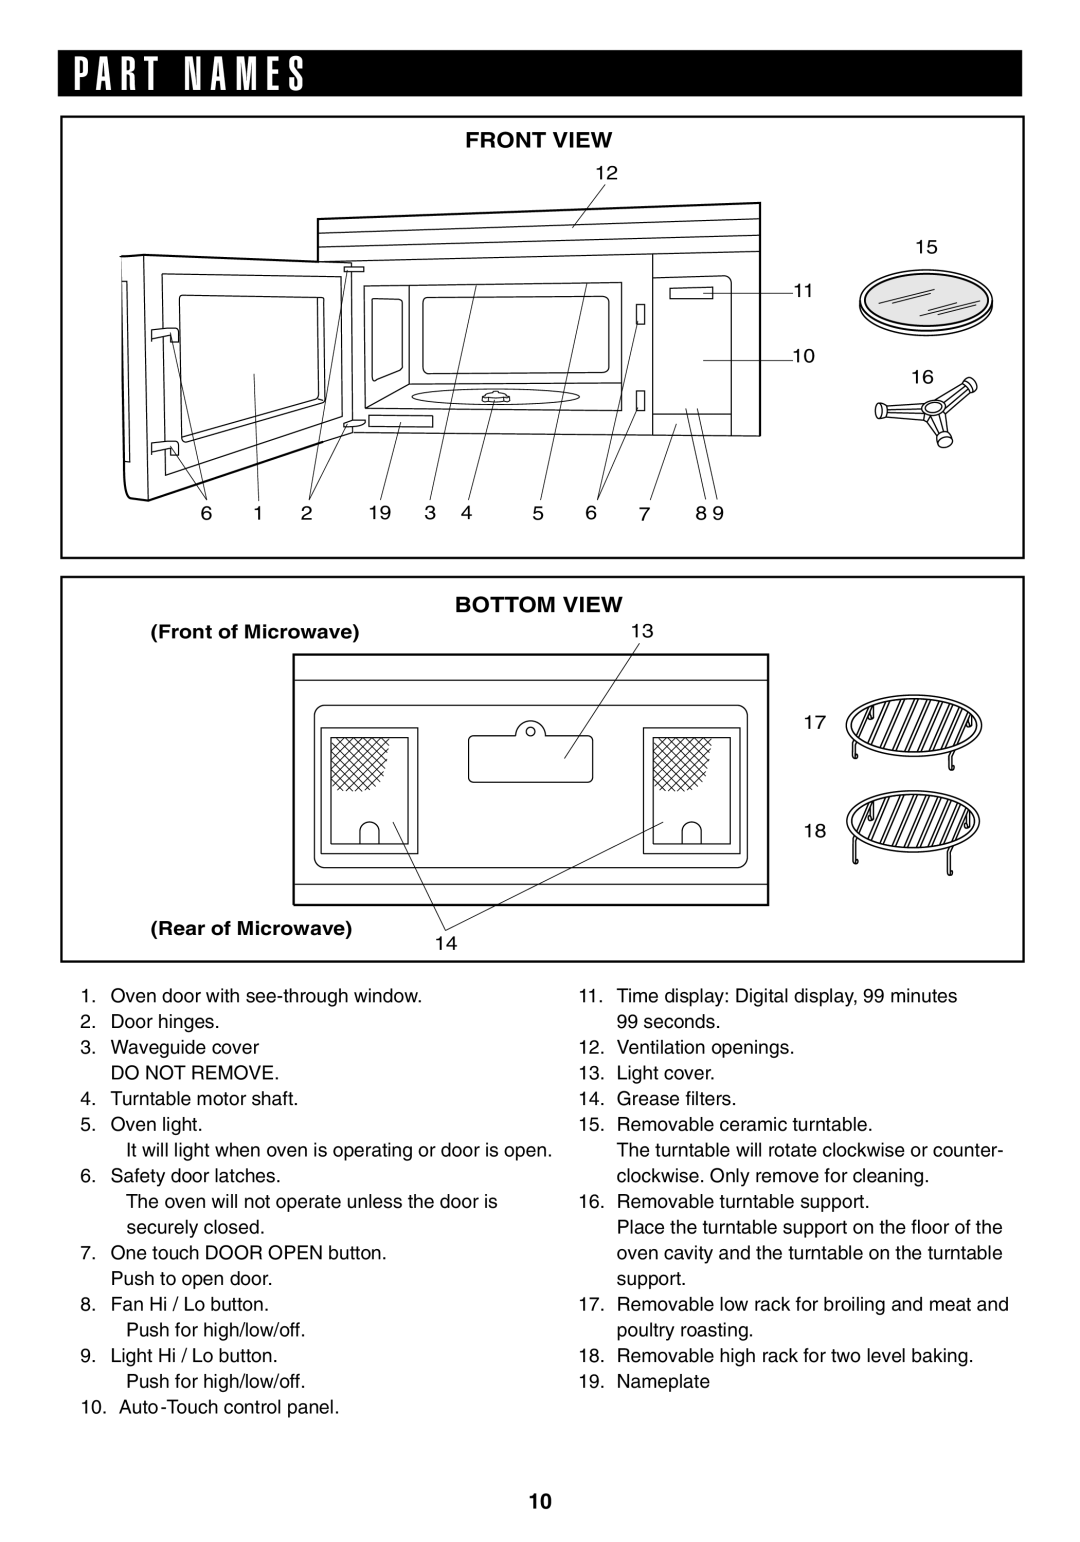 Sony R1880L operation manual P A R T N A M E S, Front View, Bottom View 